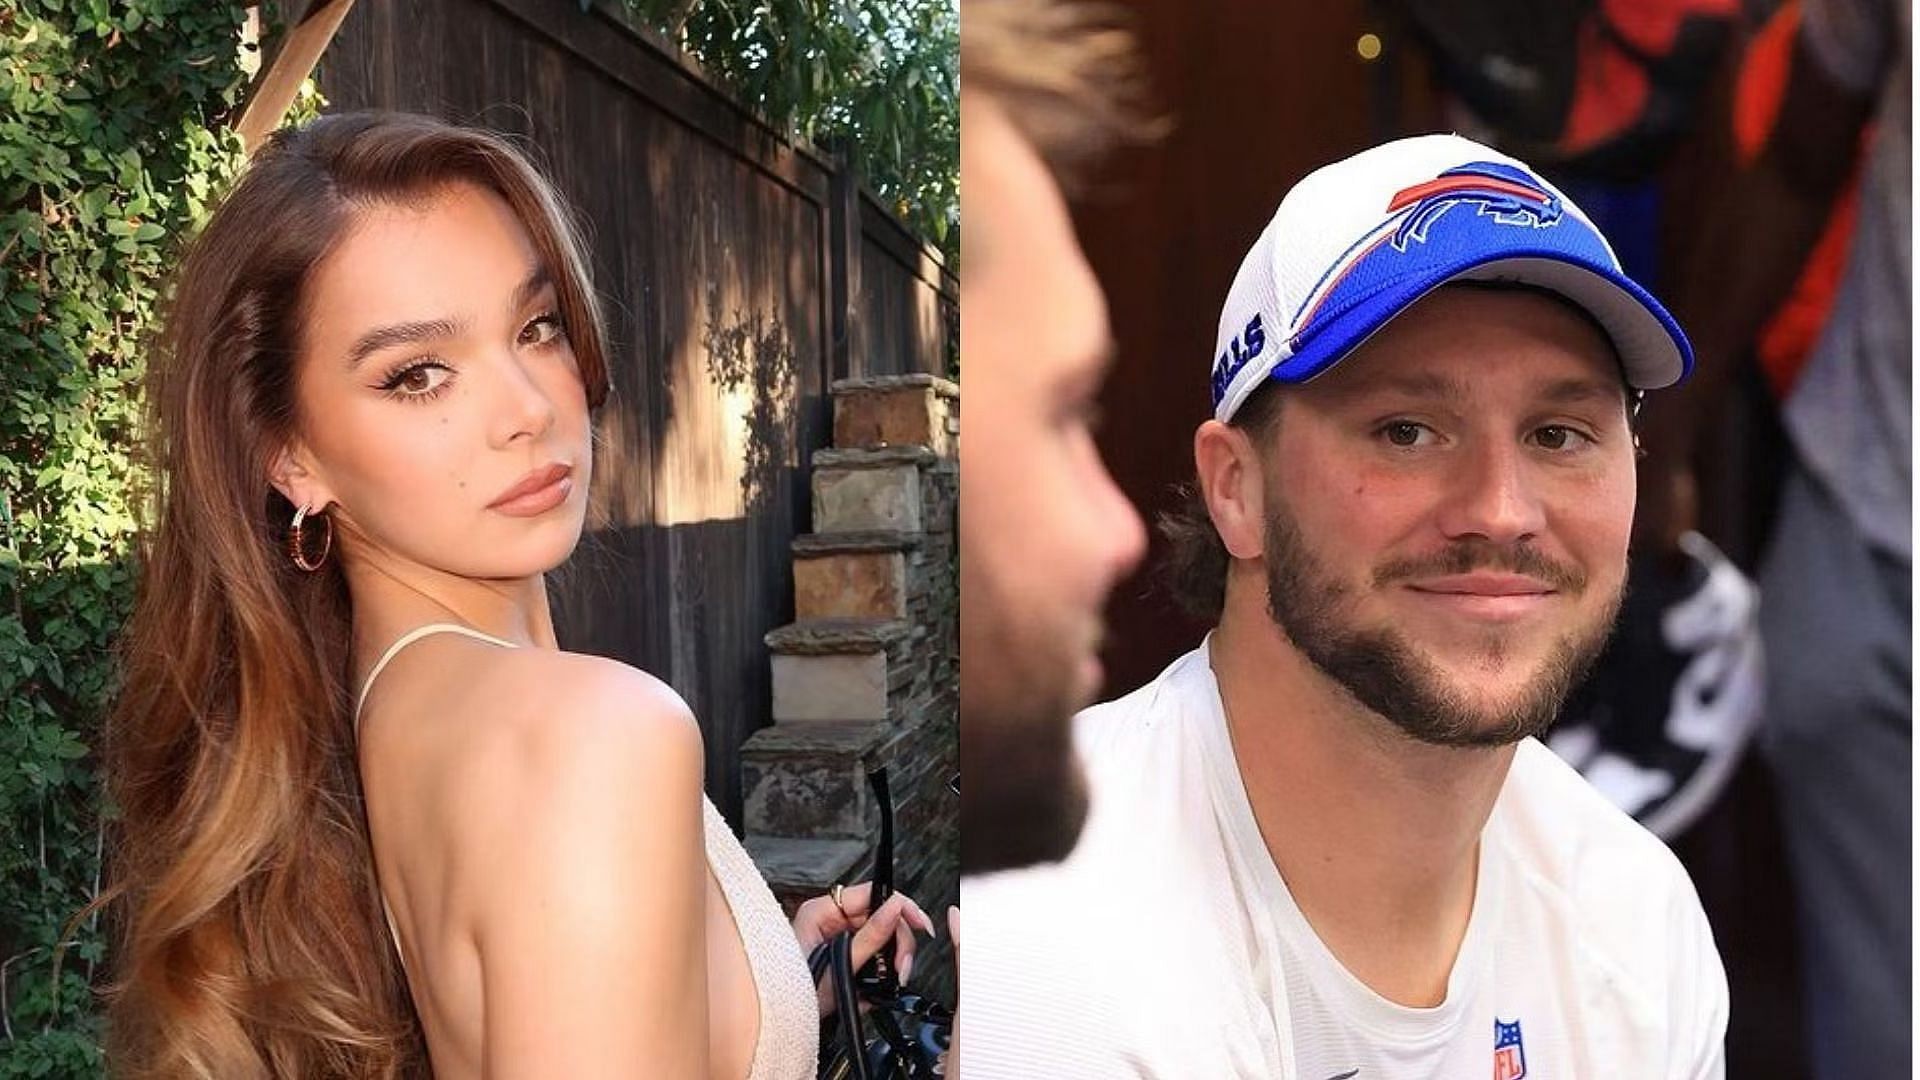 Hailee Steinfeld’s appearance at Josh Allen’s game sparks speculation among fans